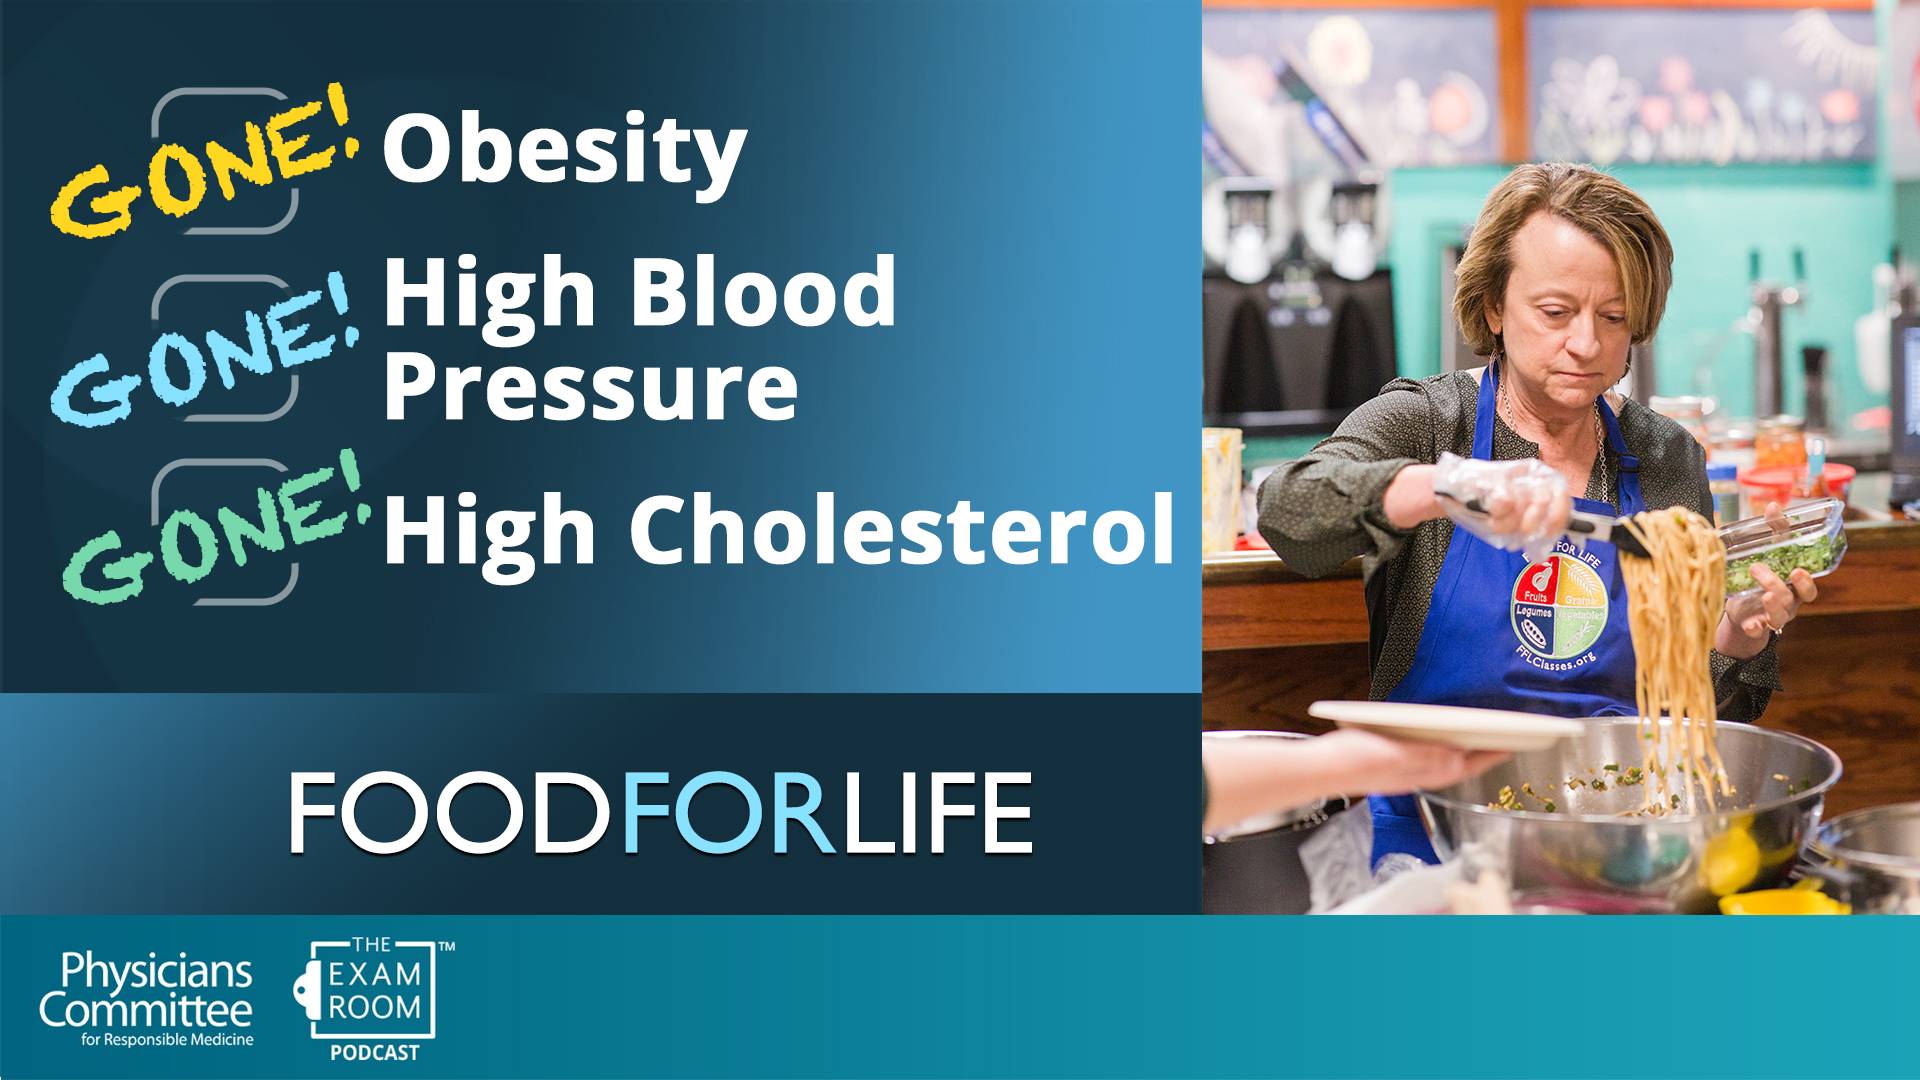 60-Pound Weight Loss! High Cholesterol and High Blood Pressure Gone!